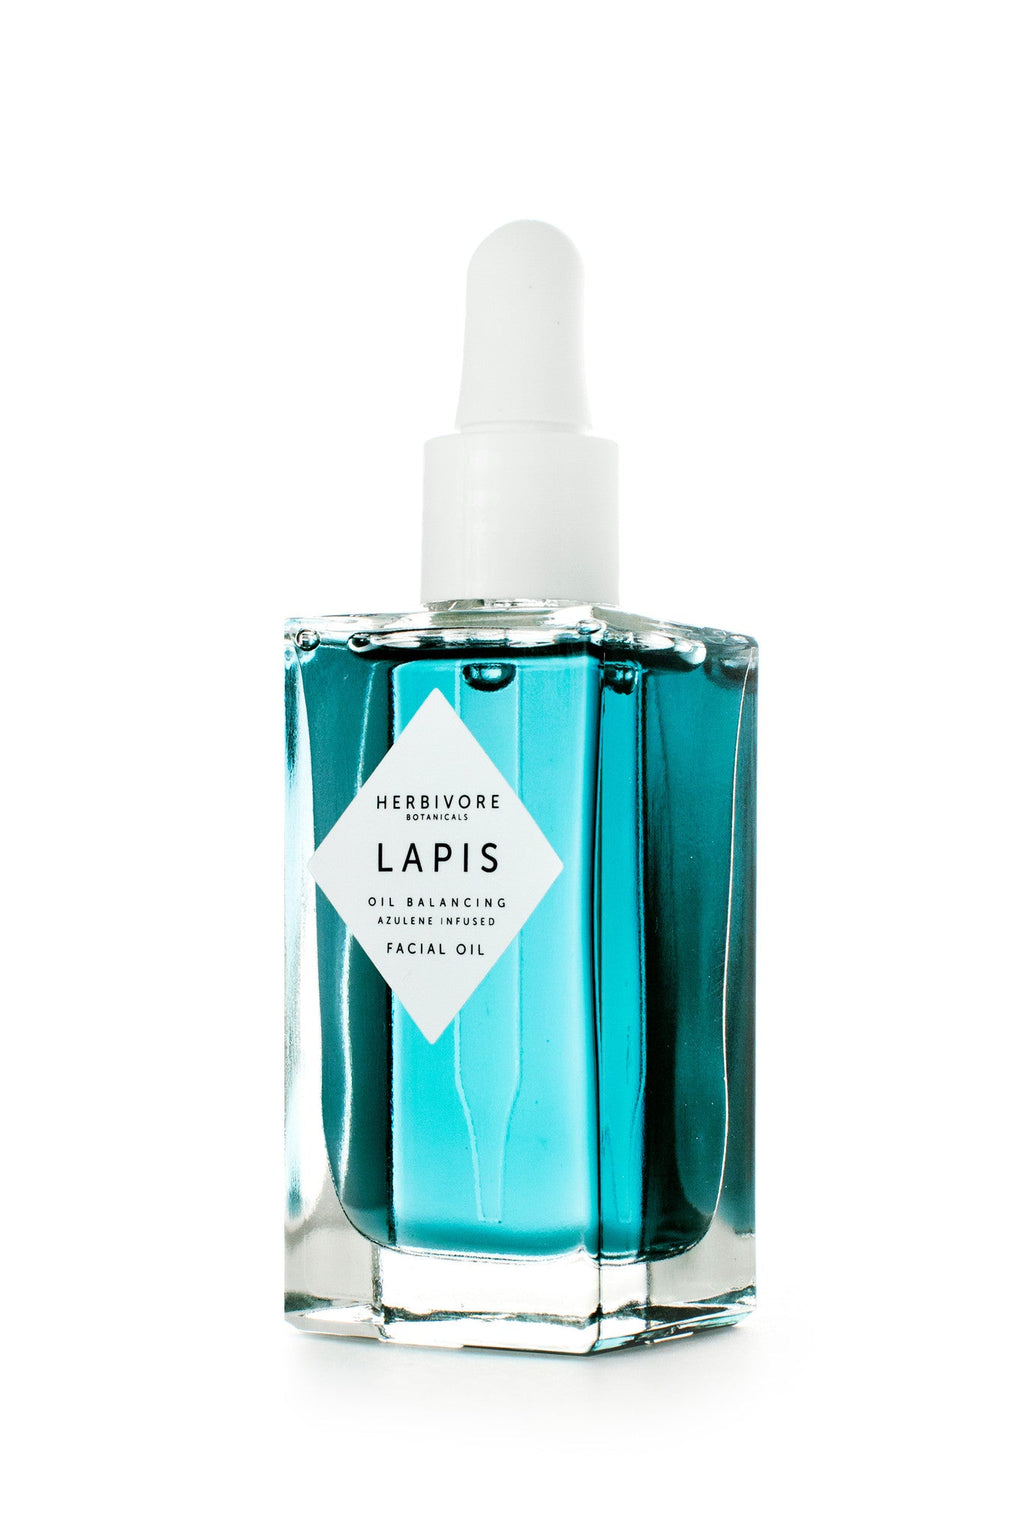 Lapis Facial Oil - Driftwood Maui & Home By Driftwood